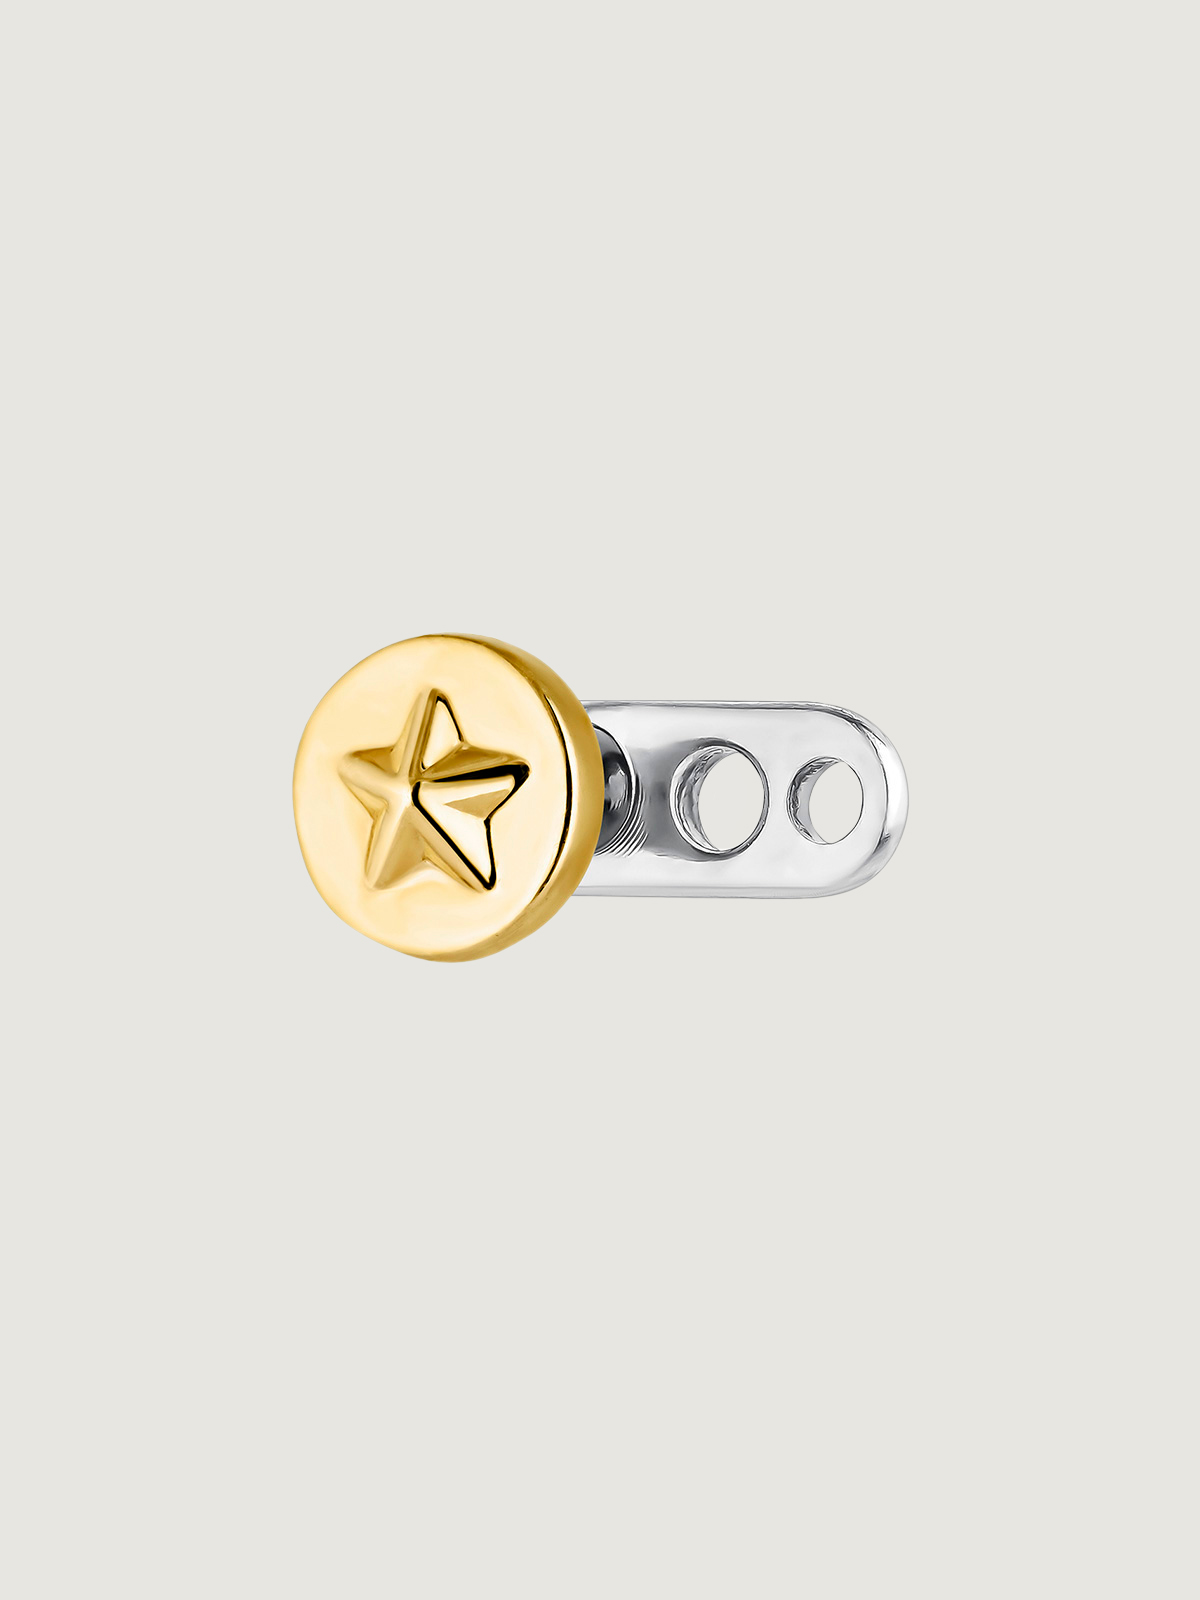 18K Yellow Gold and Titanium Microdermal with Star